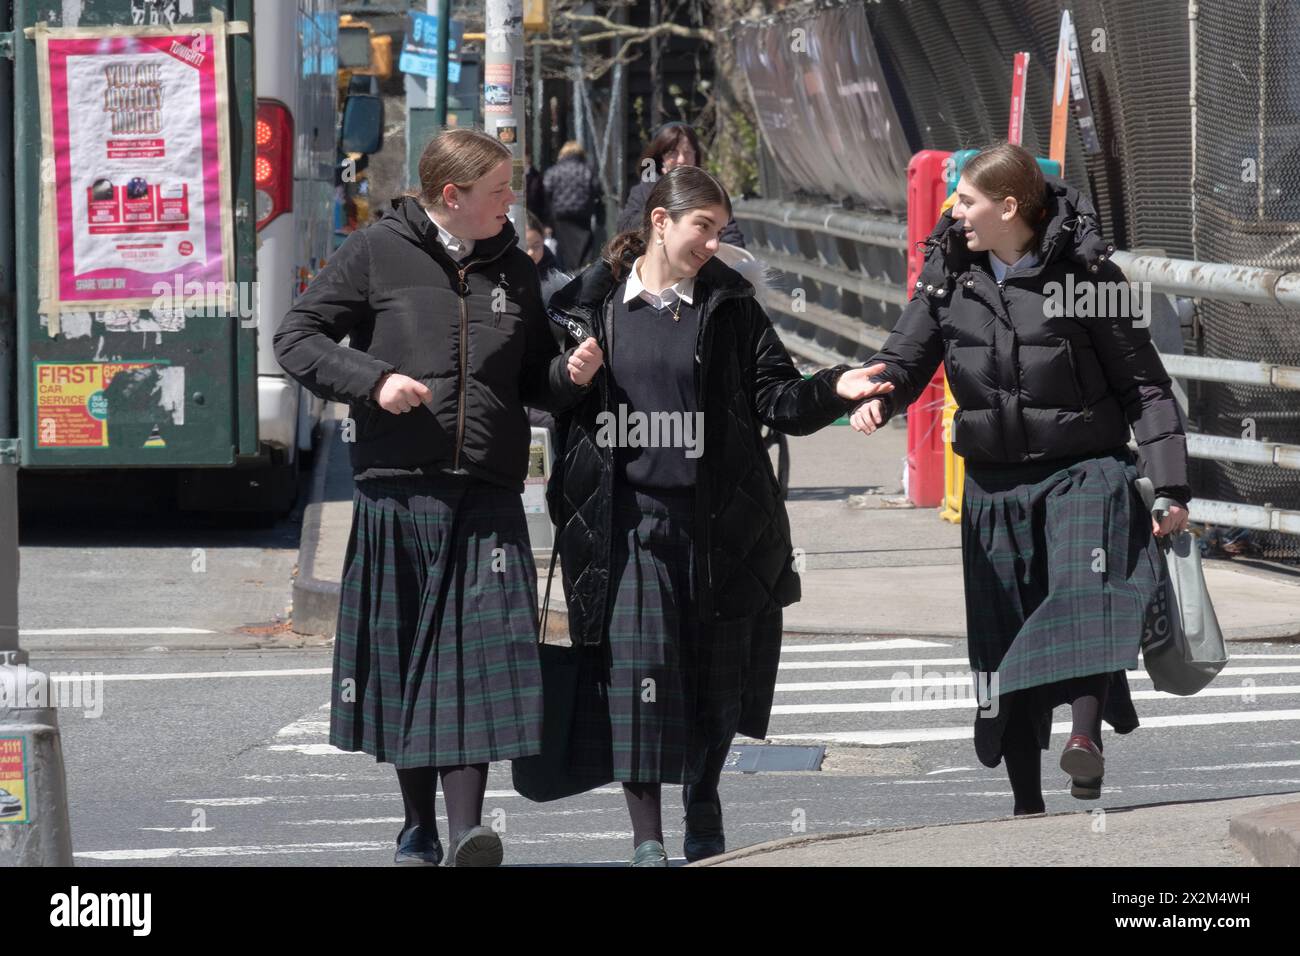 Classmates at a parochial school for religious Jewish girls head home while having an animated conversation. On Bedford Avenue in Williamsburg, NYC. Stock Photo